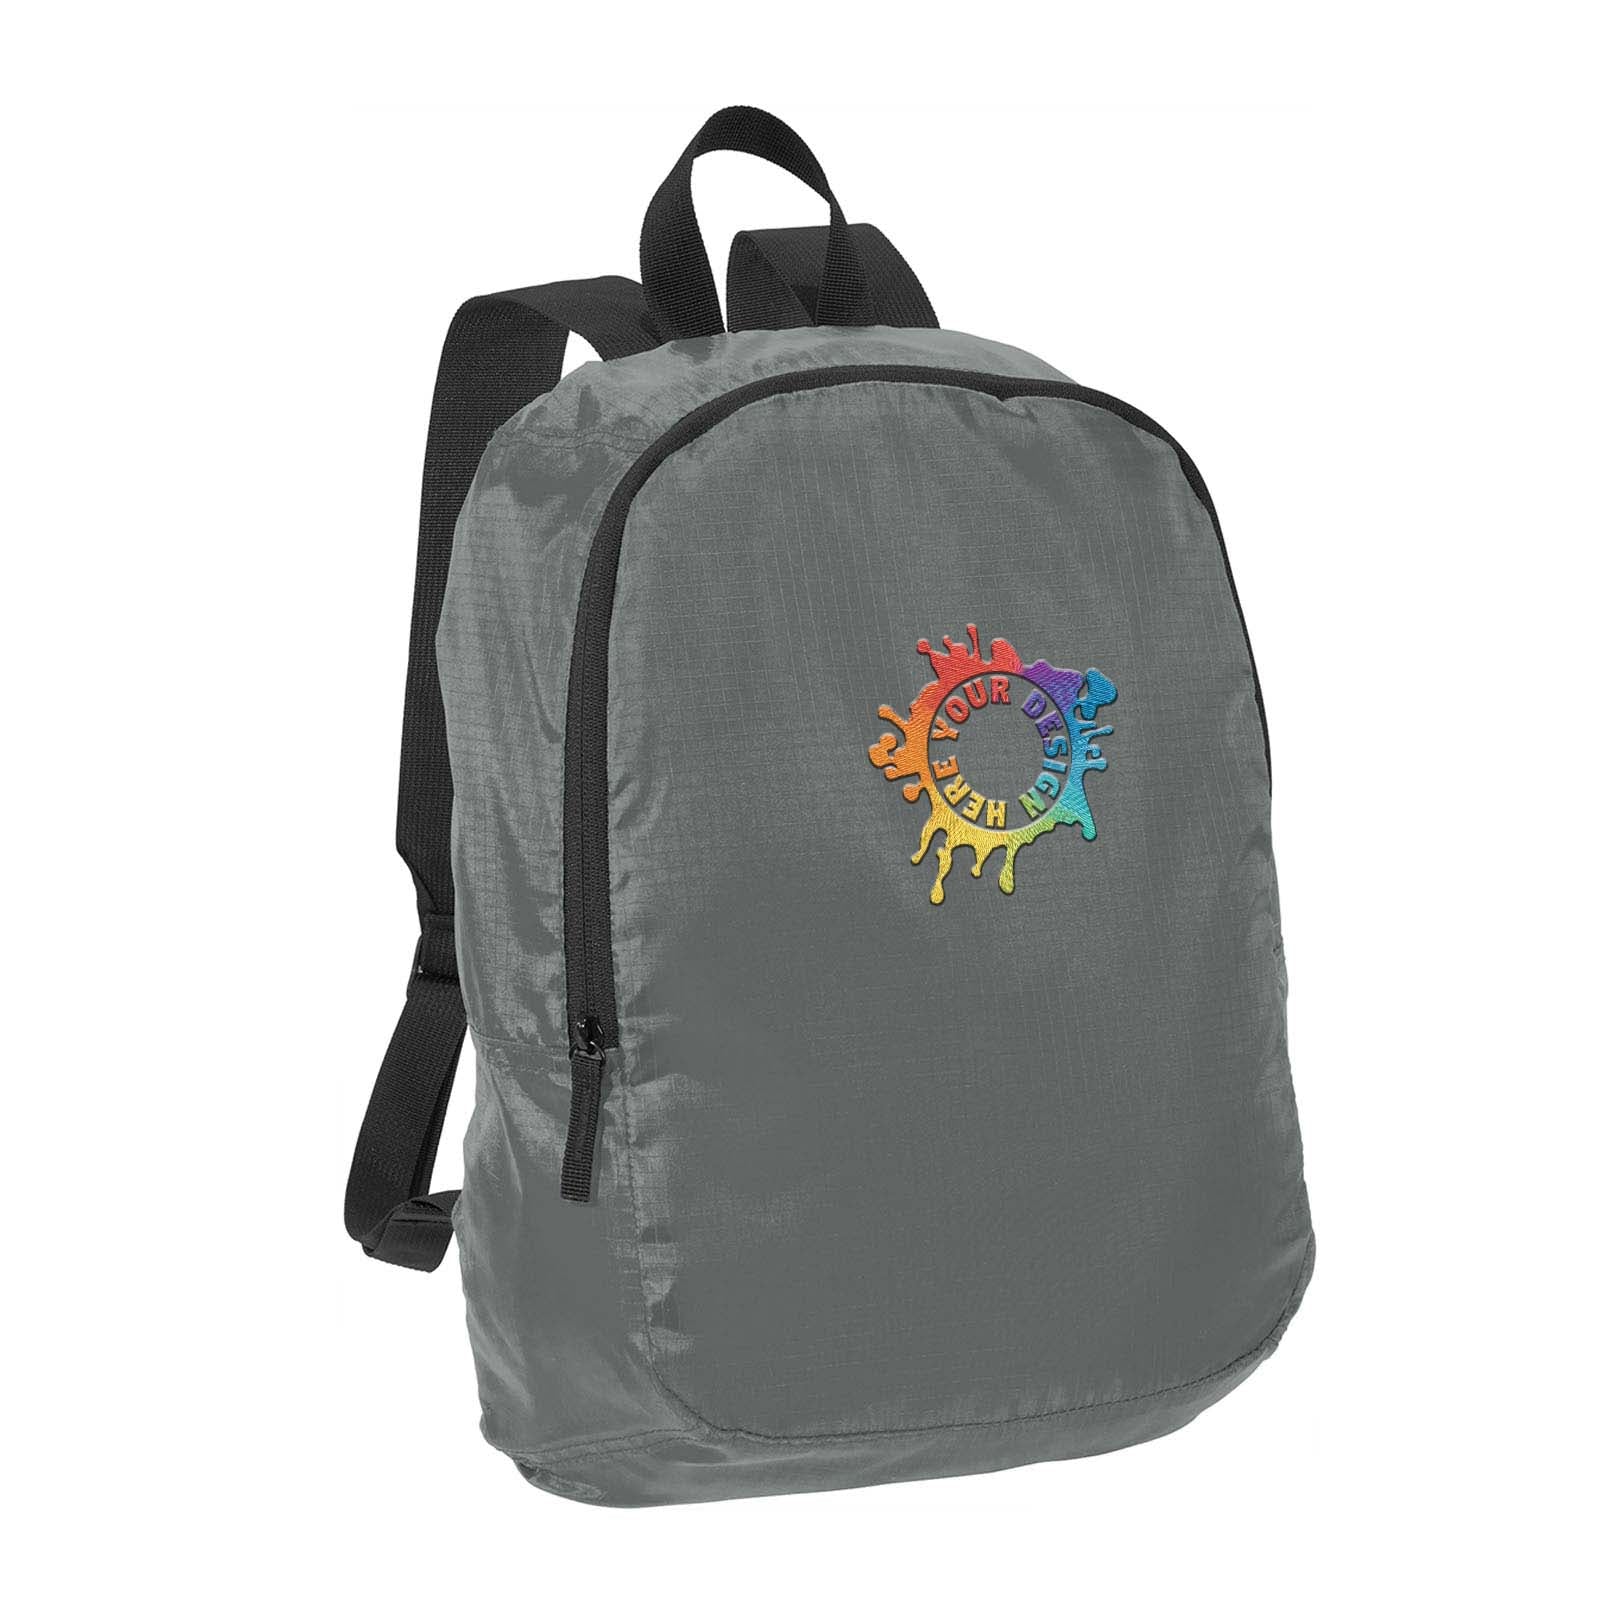 Port Authority ® Crush Ripstop Backpack Embroidery - Mato & Hash